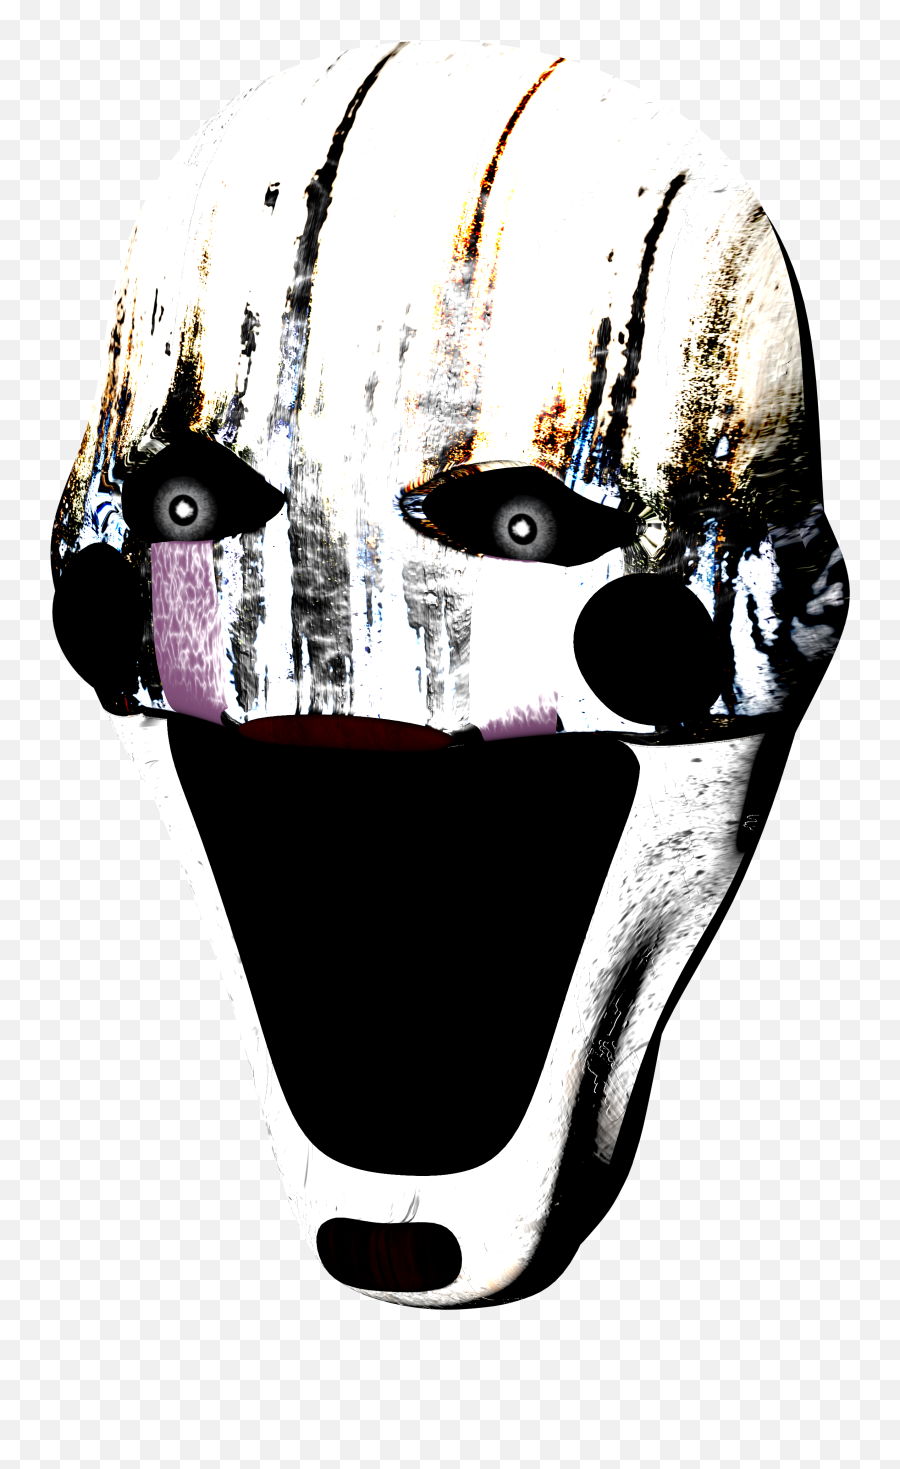 Scary Boi Png Image With No Background - Portable Network Graphics,Boi Png